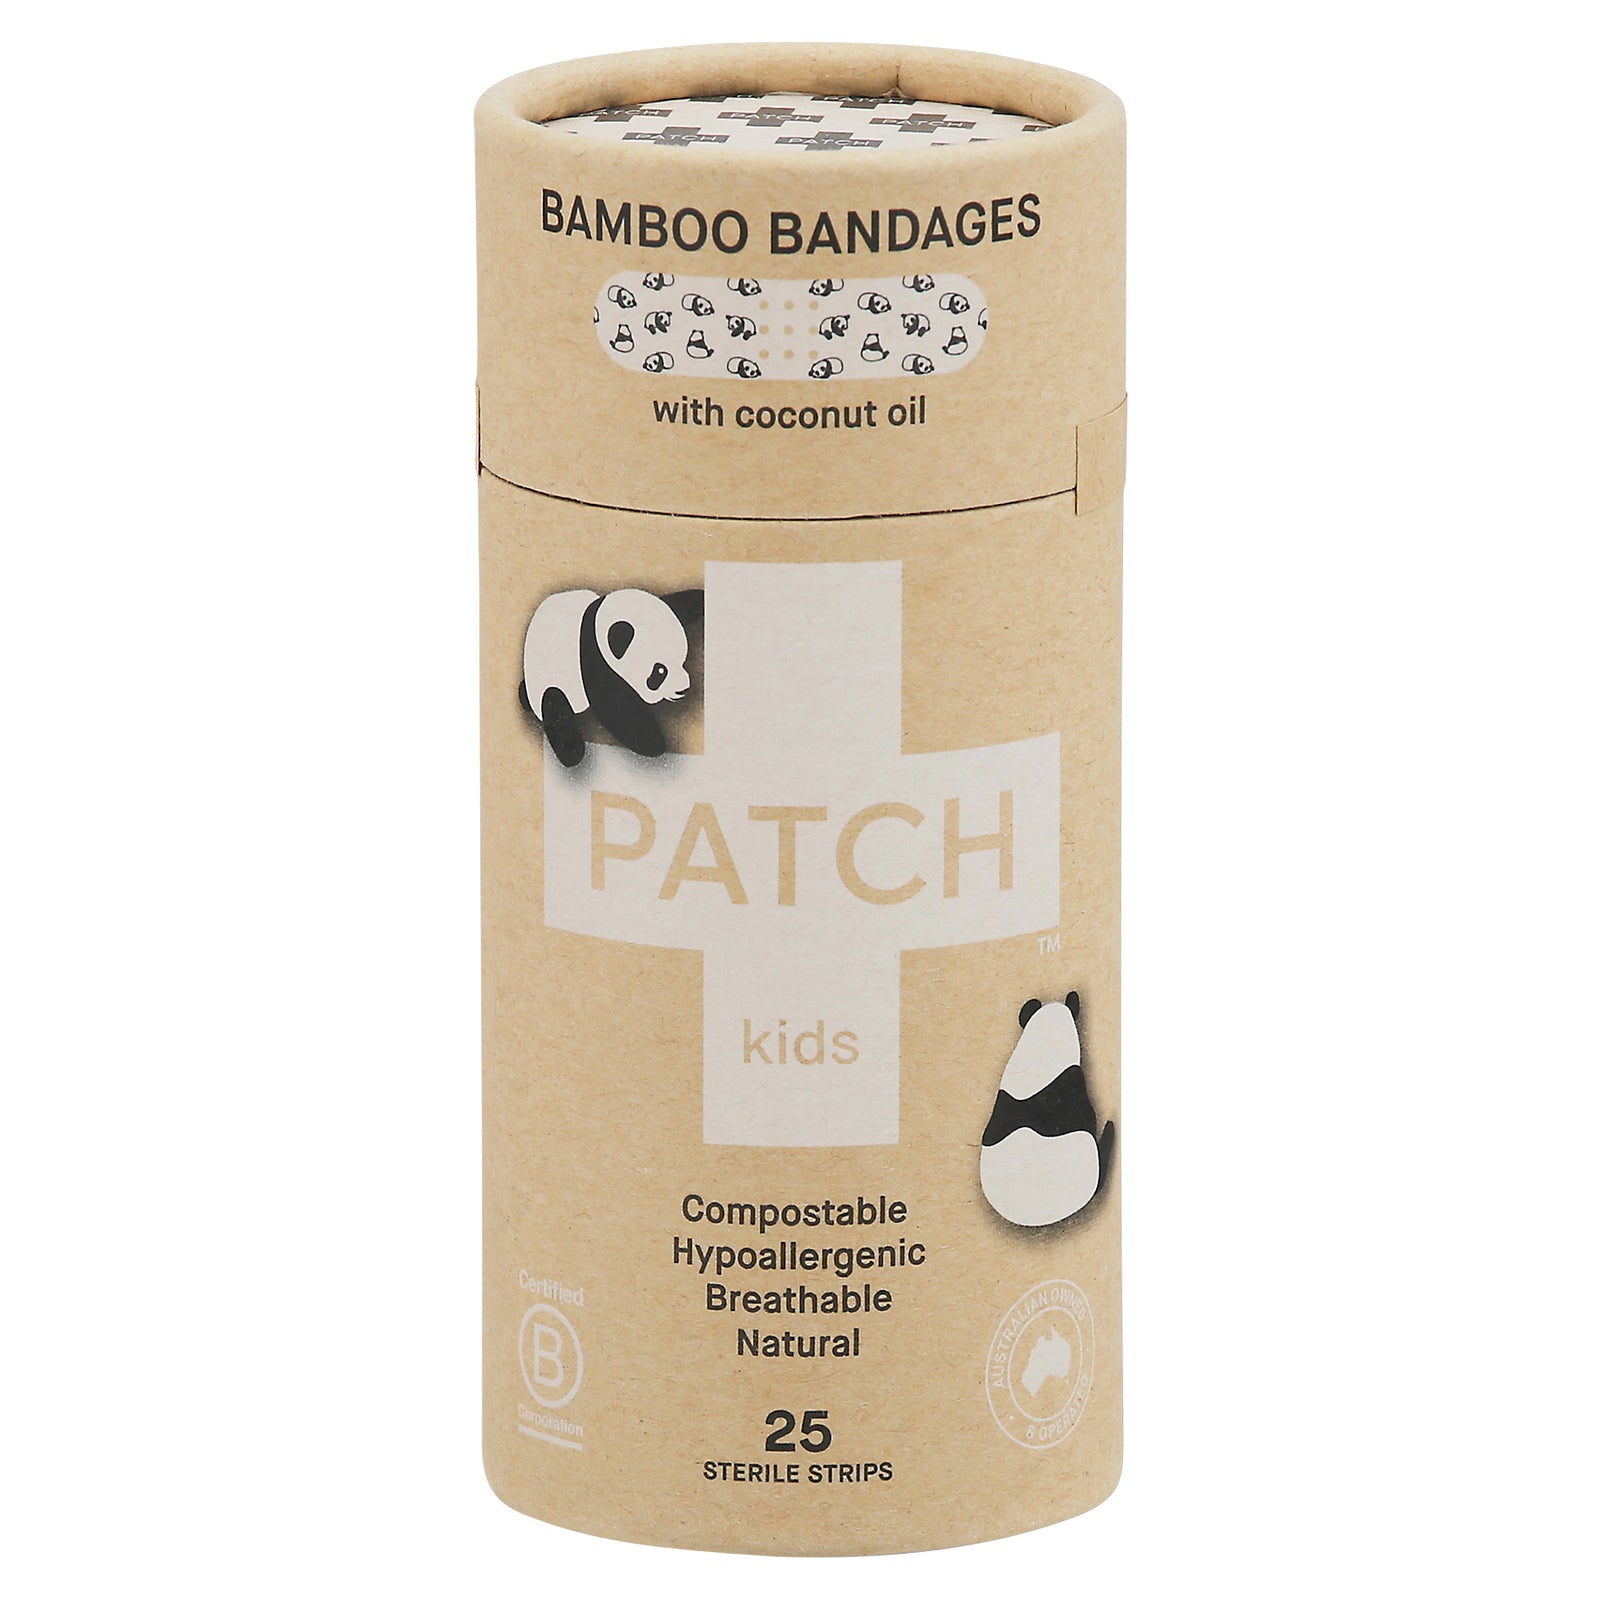 Patch - Bandages Kids Coconut Bamboo - Case Of 3 - 25 Ct